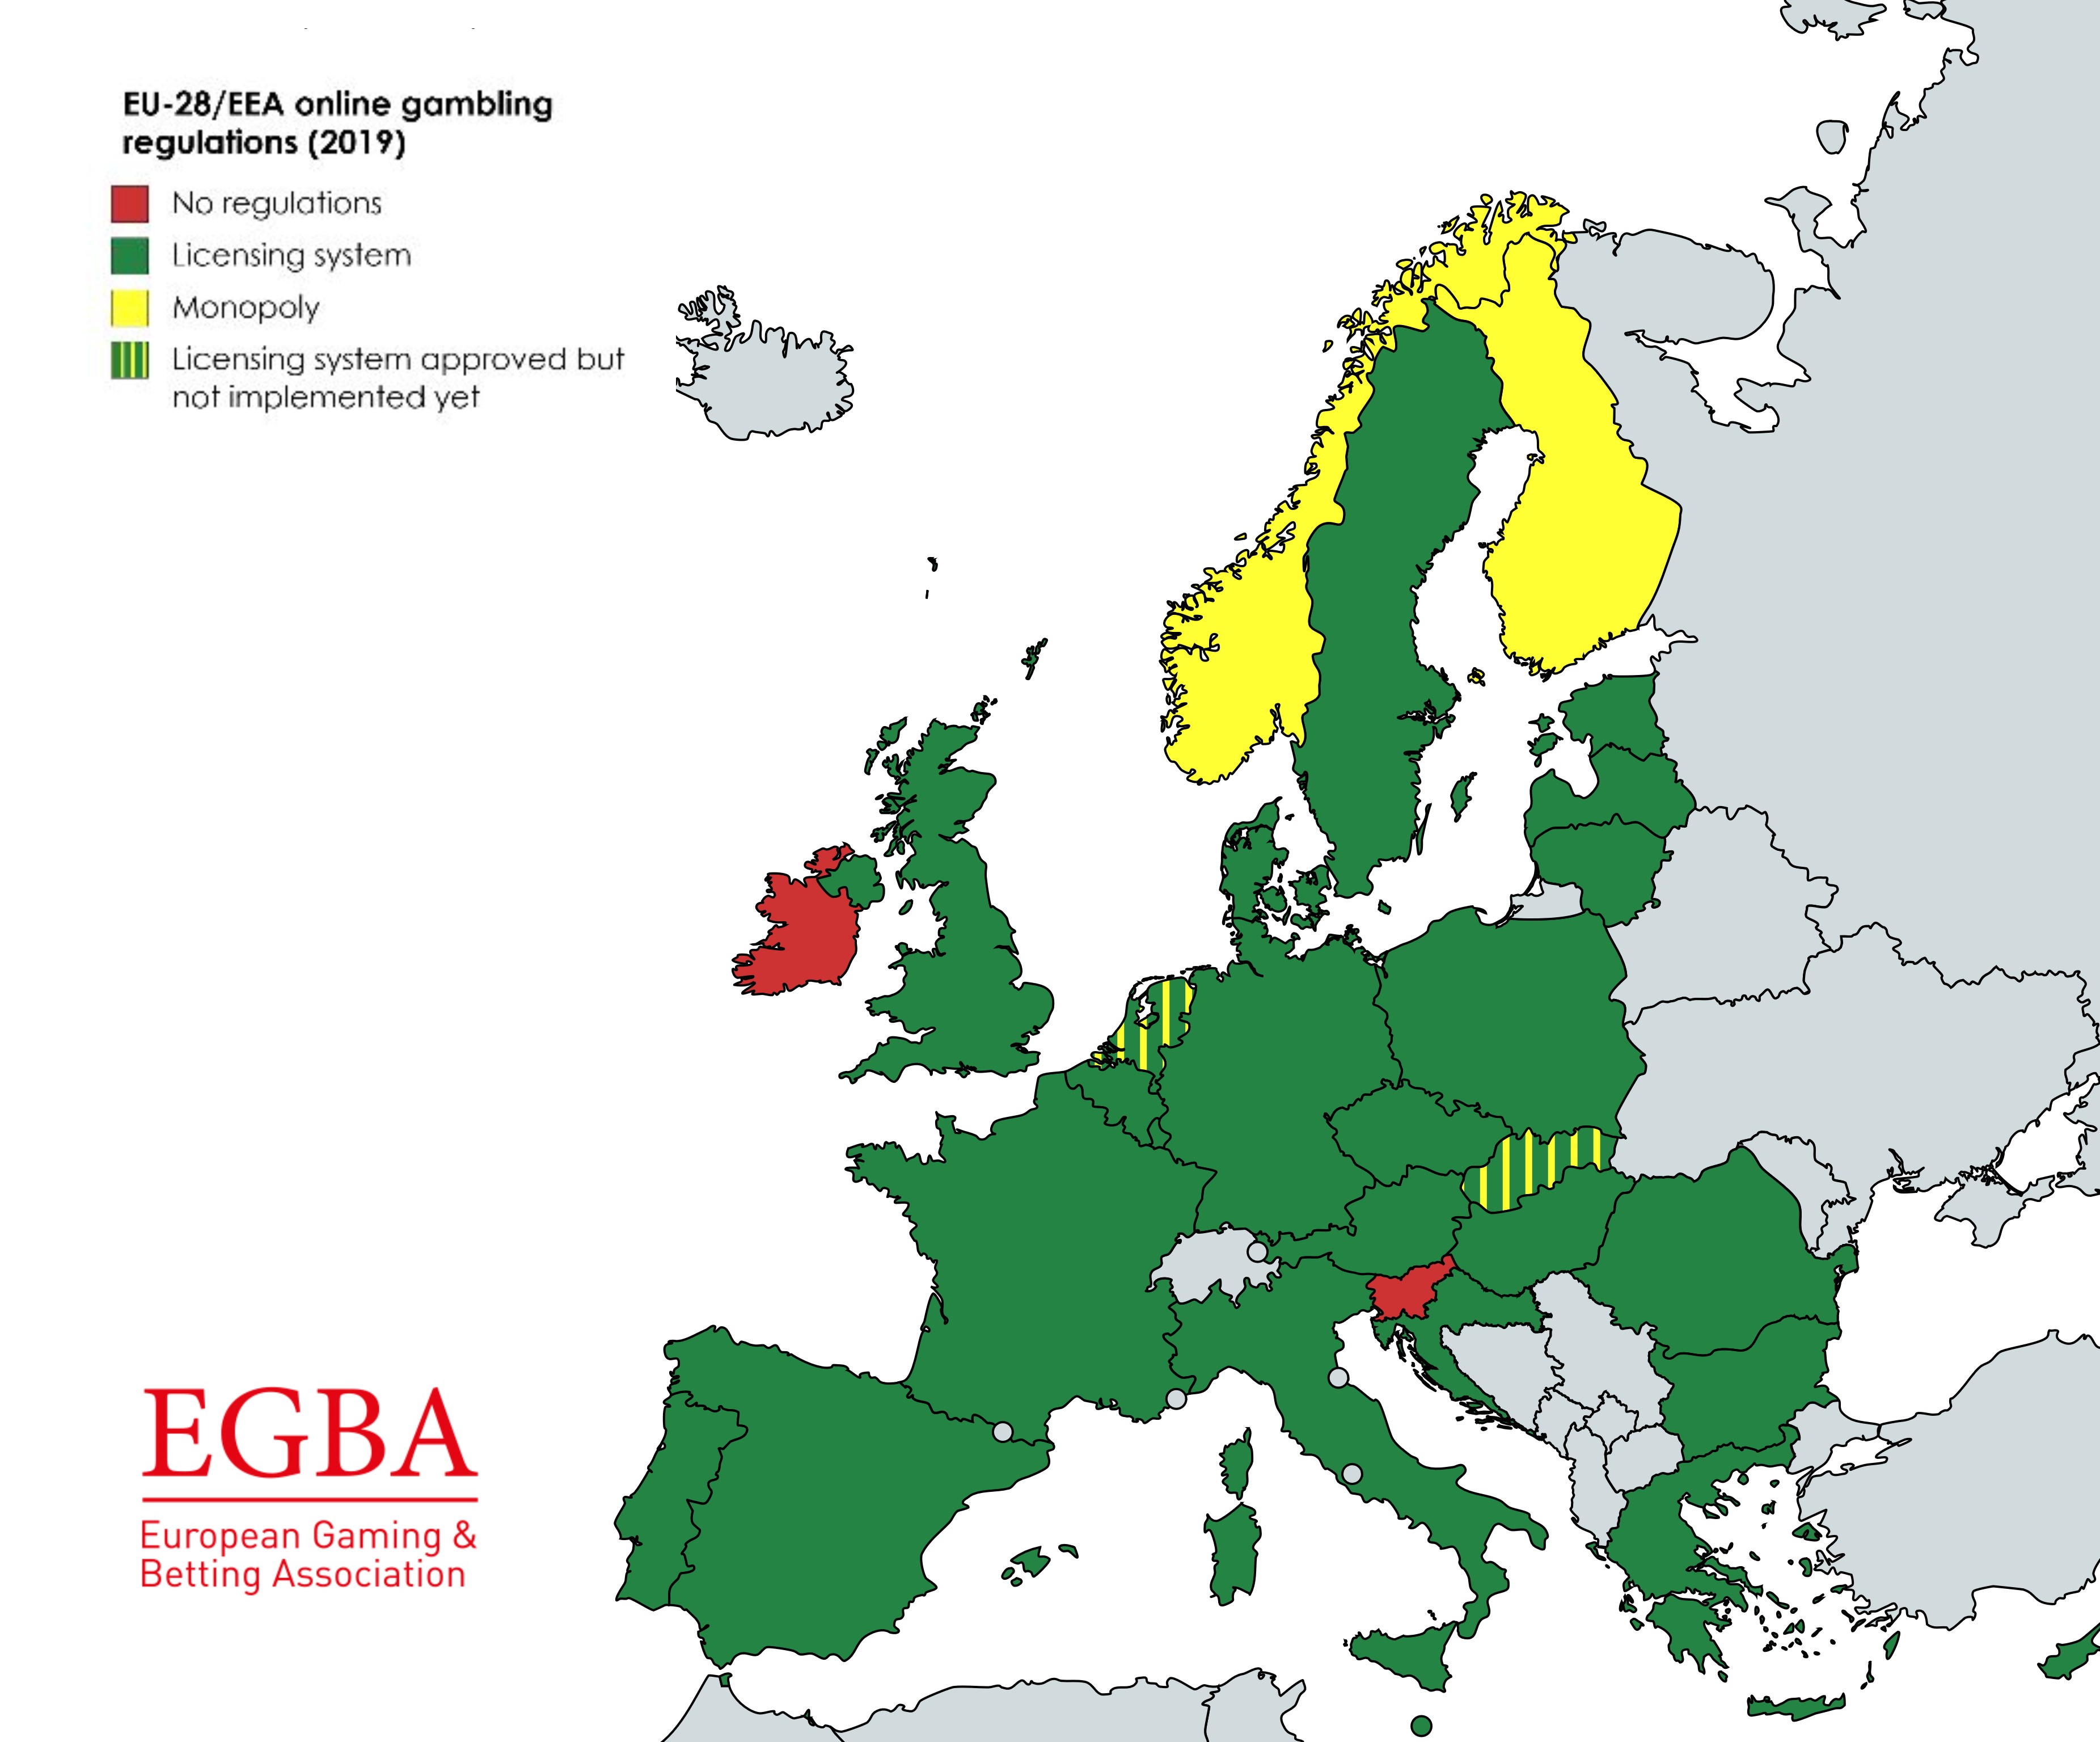 EGBA files lawsuit against Norway payment-blocking plans 